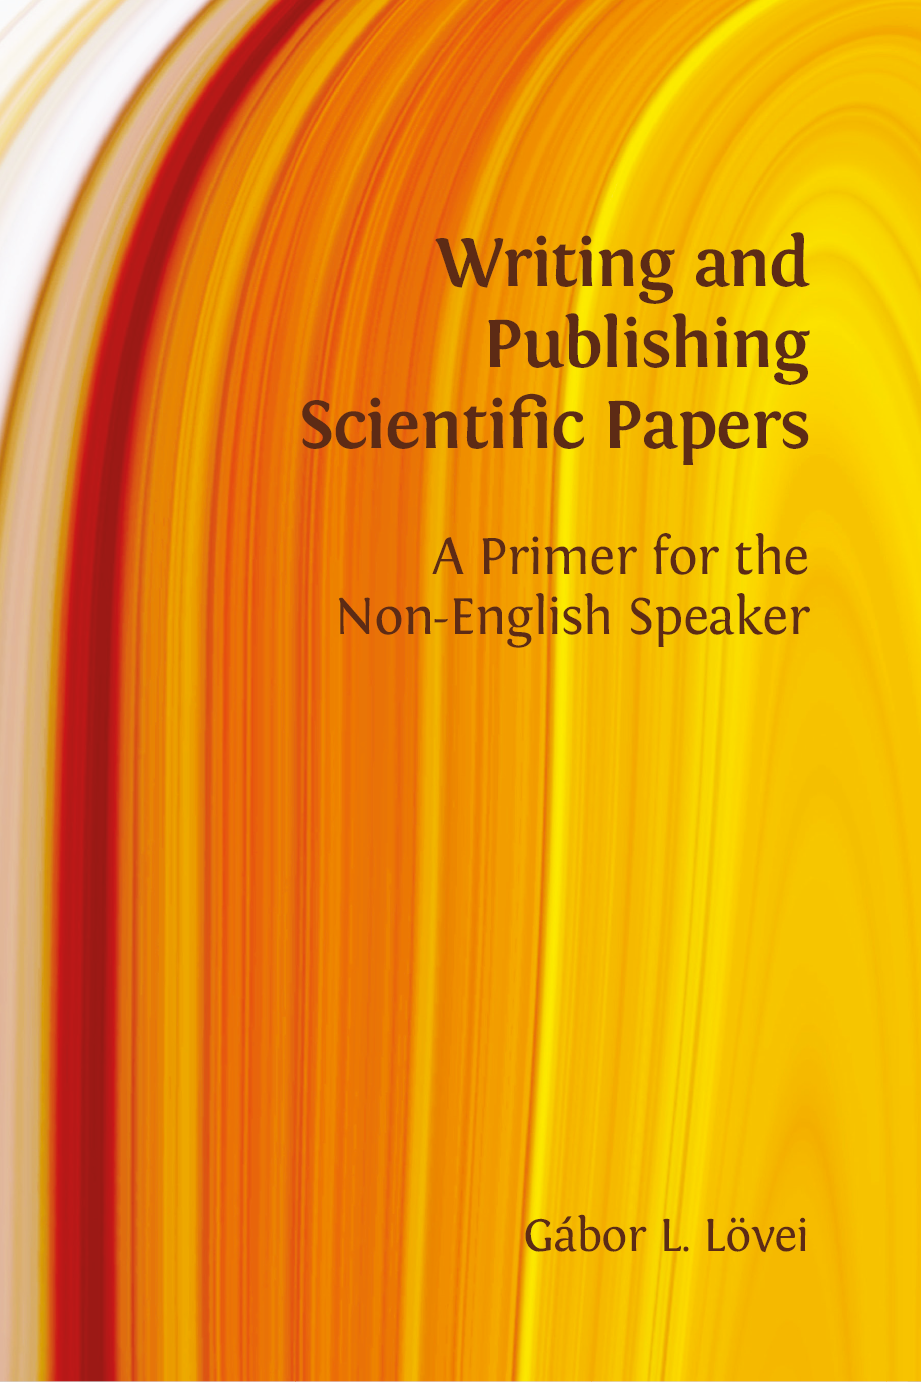 Writing and Publishing Scientific Papers: A Primer for the Non